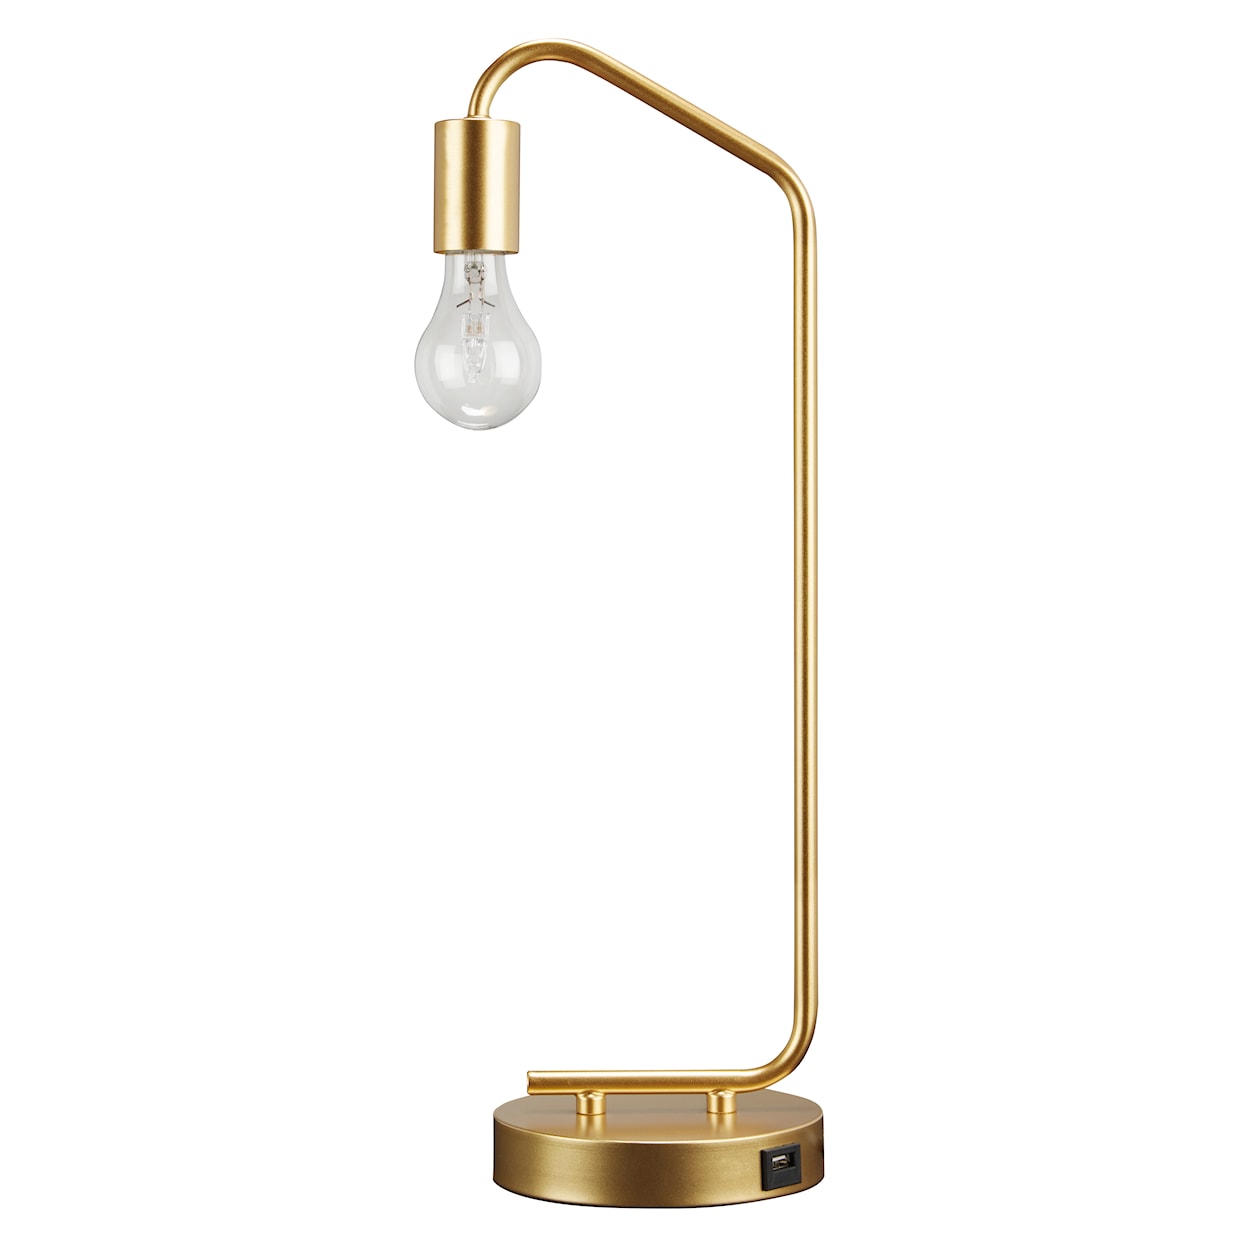 Signature Design by Ashley Lamps - Casual Covybend Desk Lamp